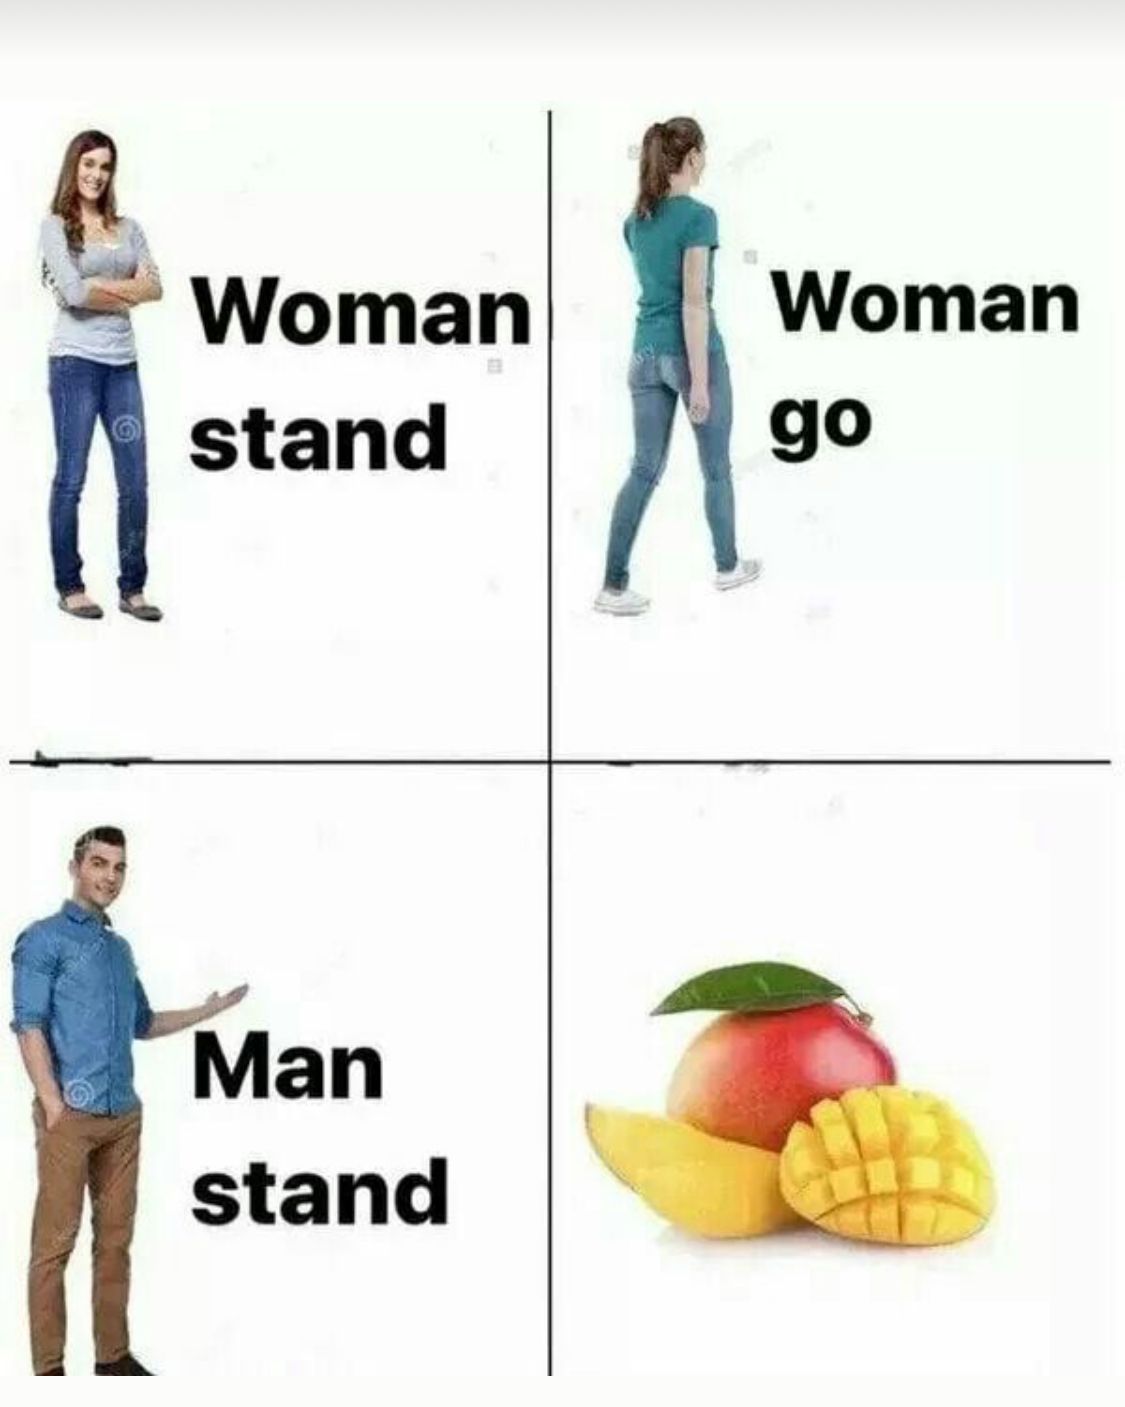 Woman
stand
Man
stand
Woman
go